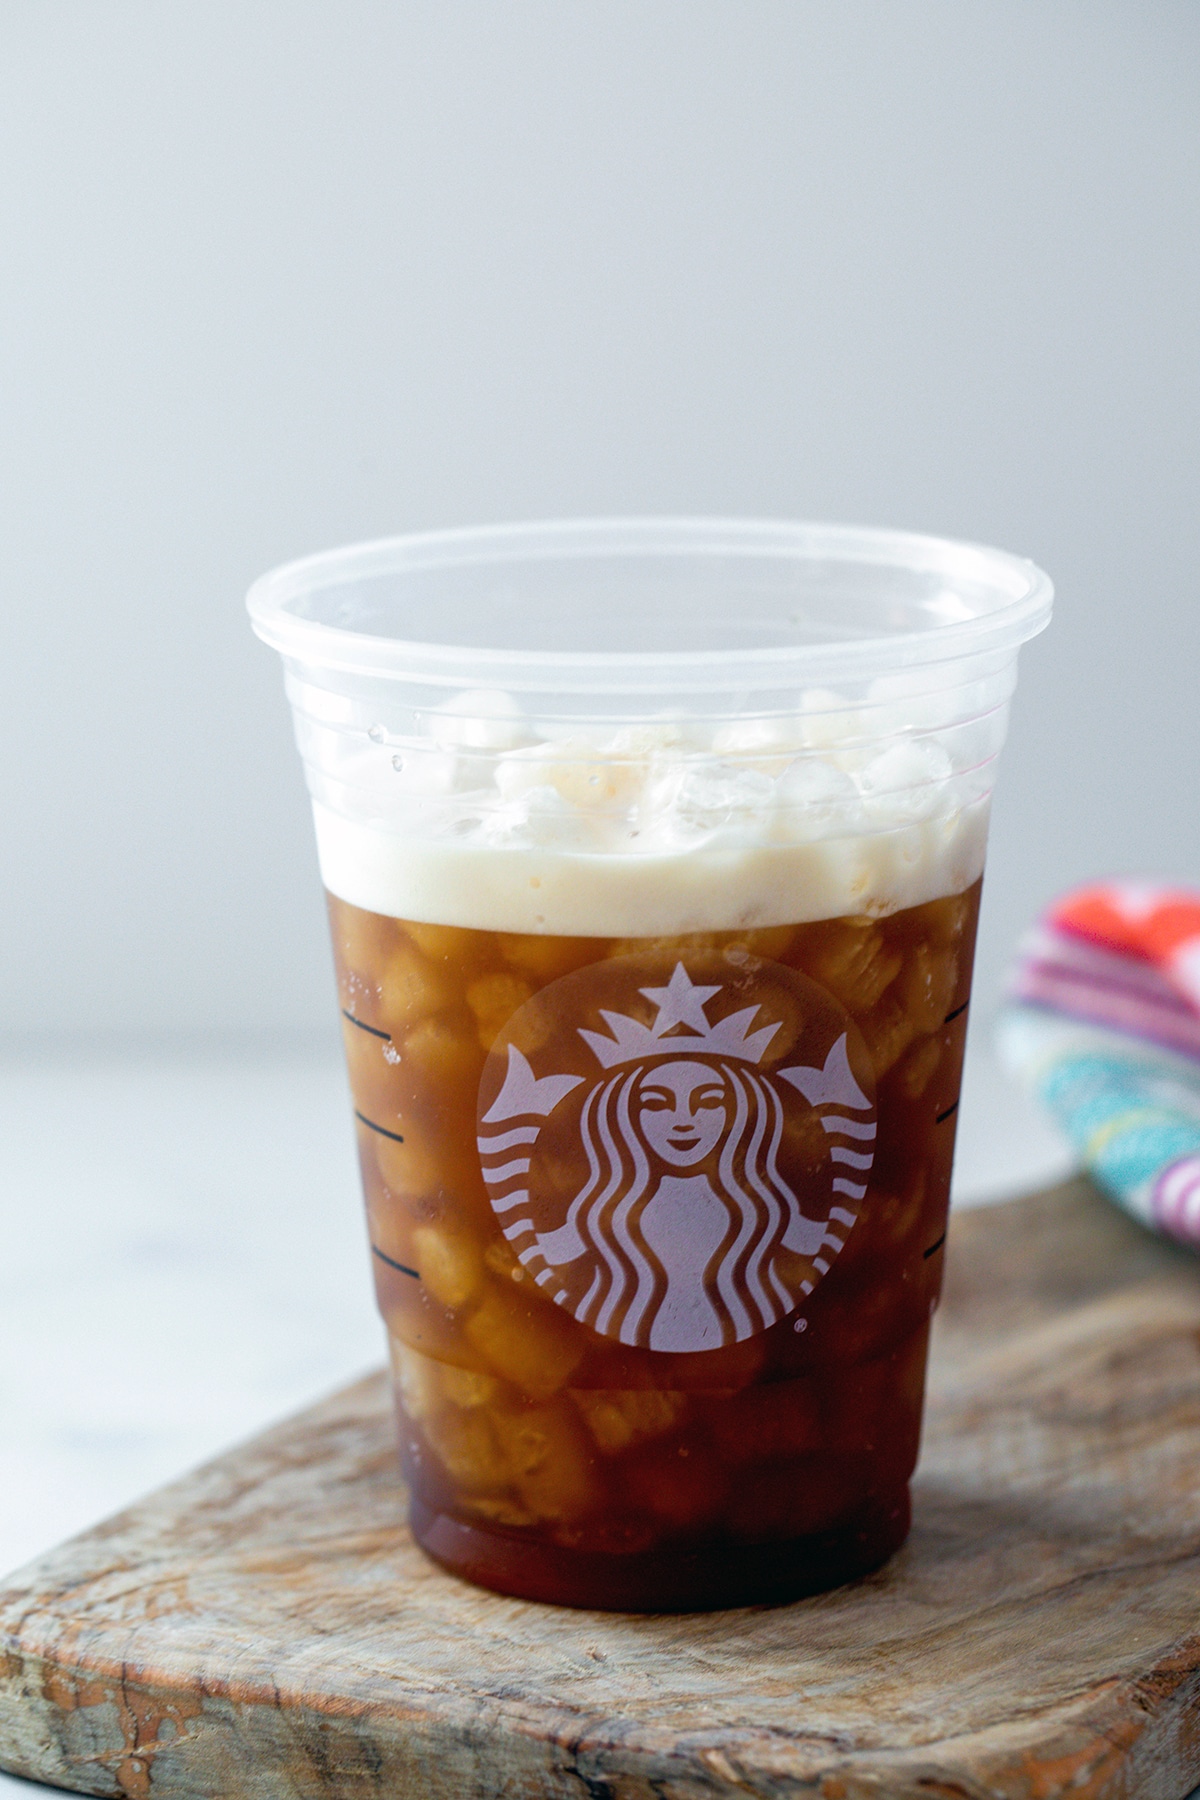 Shaken and frothy espresso and brown sugar syrup in Starbucks cup.